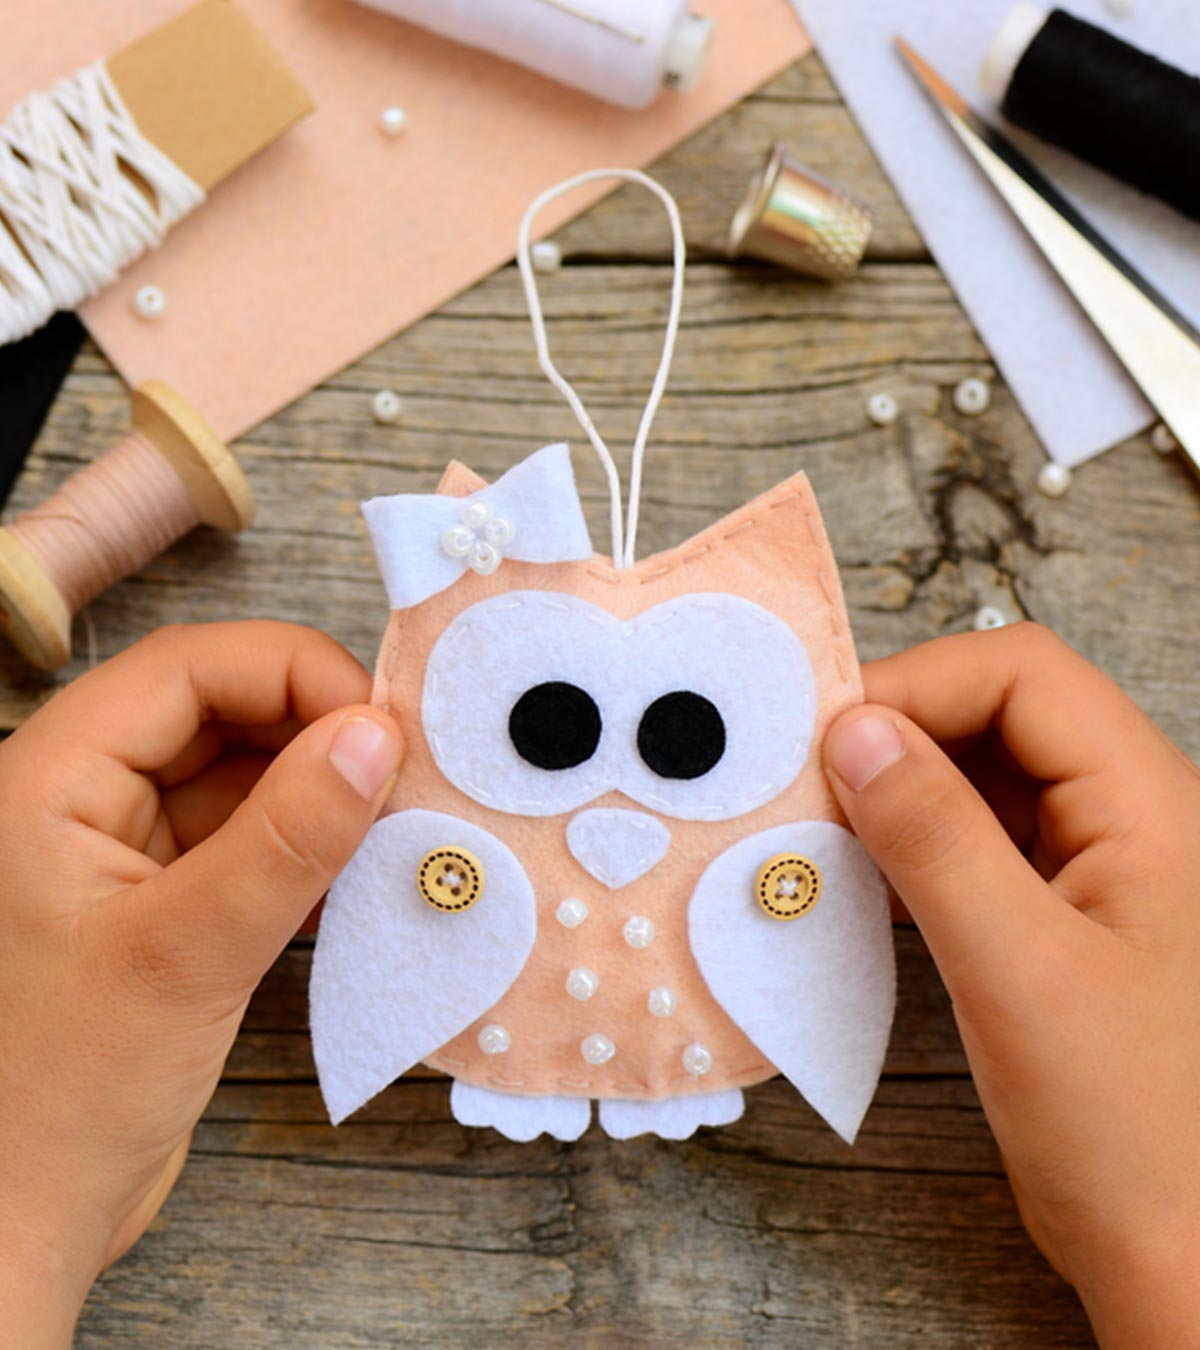 Making Kid's toys (DIY) Craft Ideas to sell Online